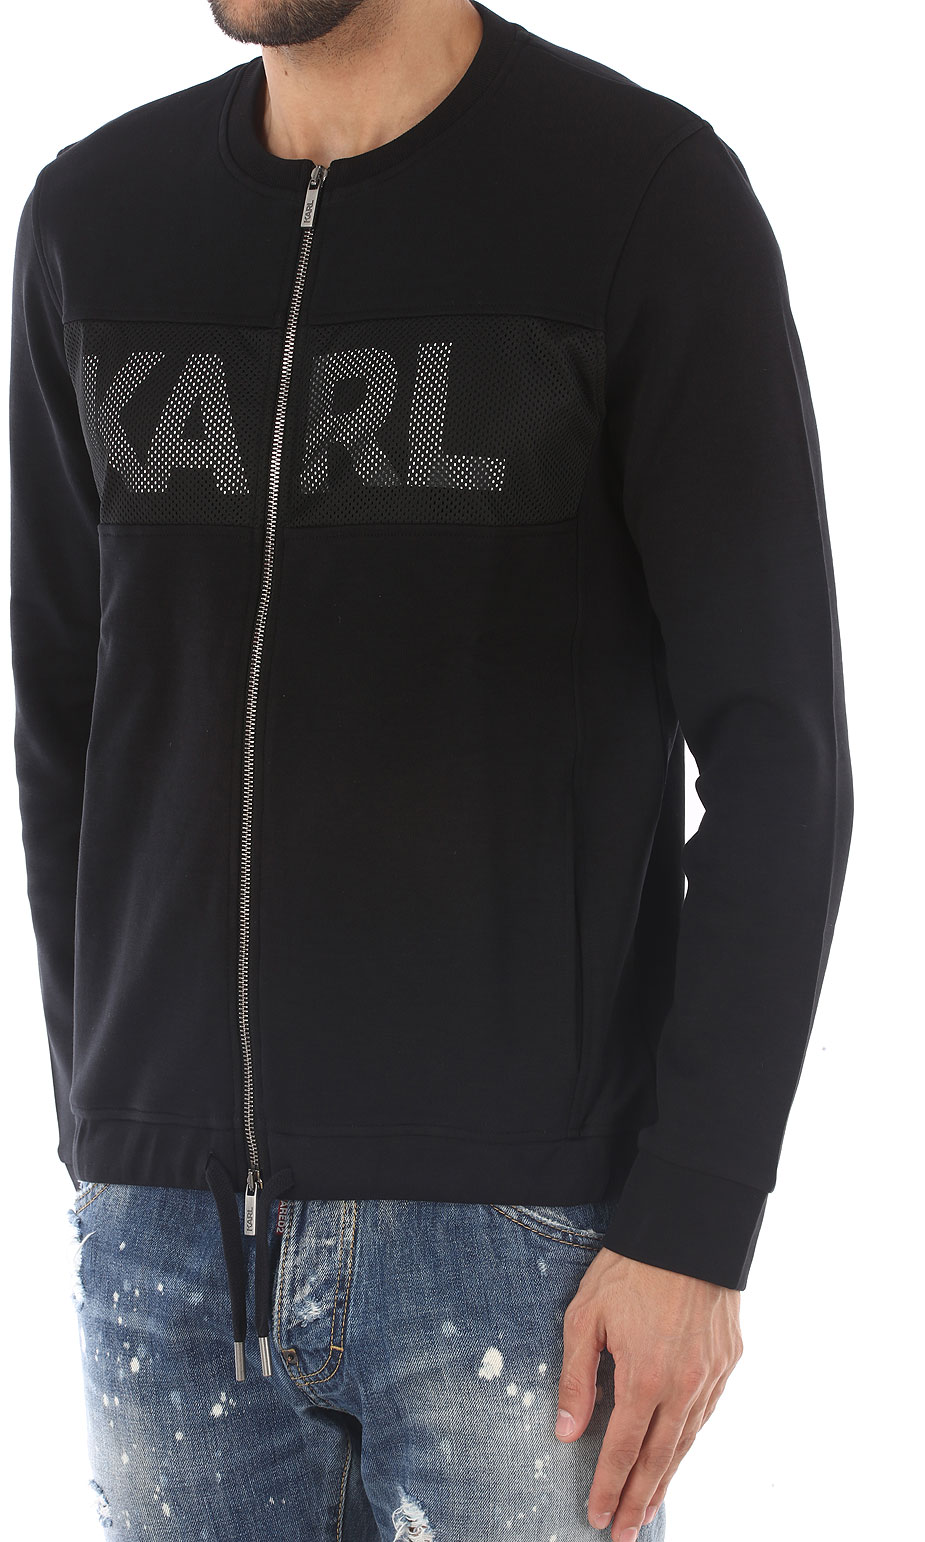 Mens Clothing Karl Lagerfeld, Style code: 571-705-008